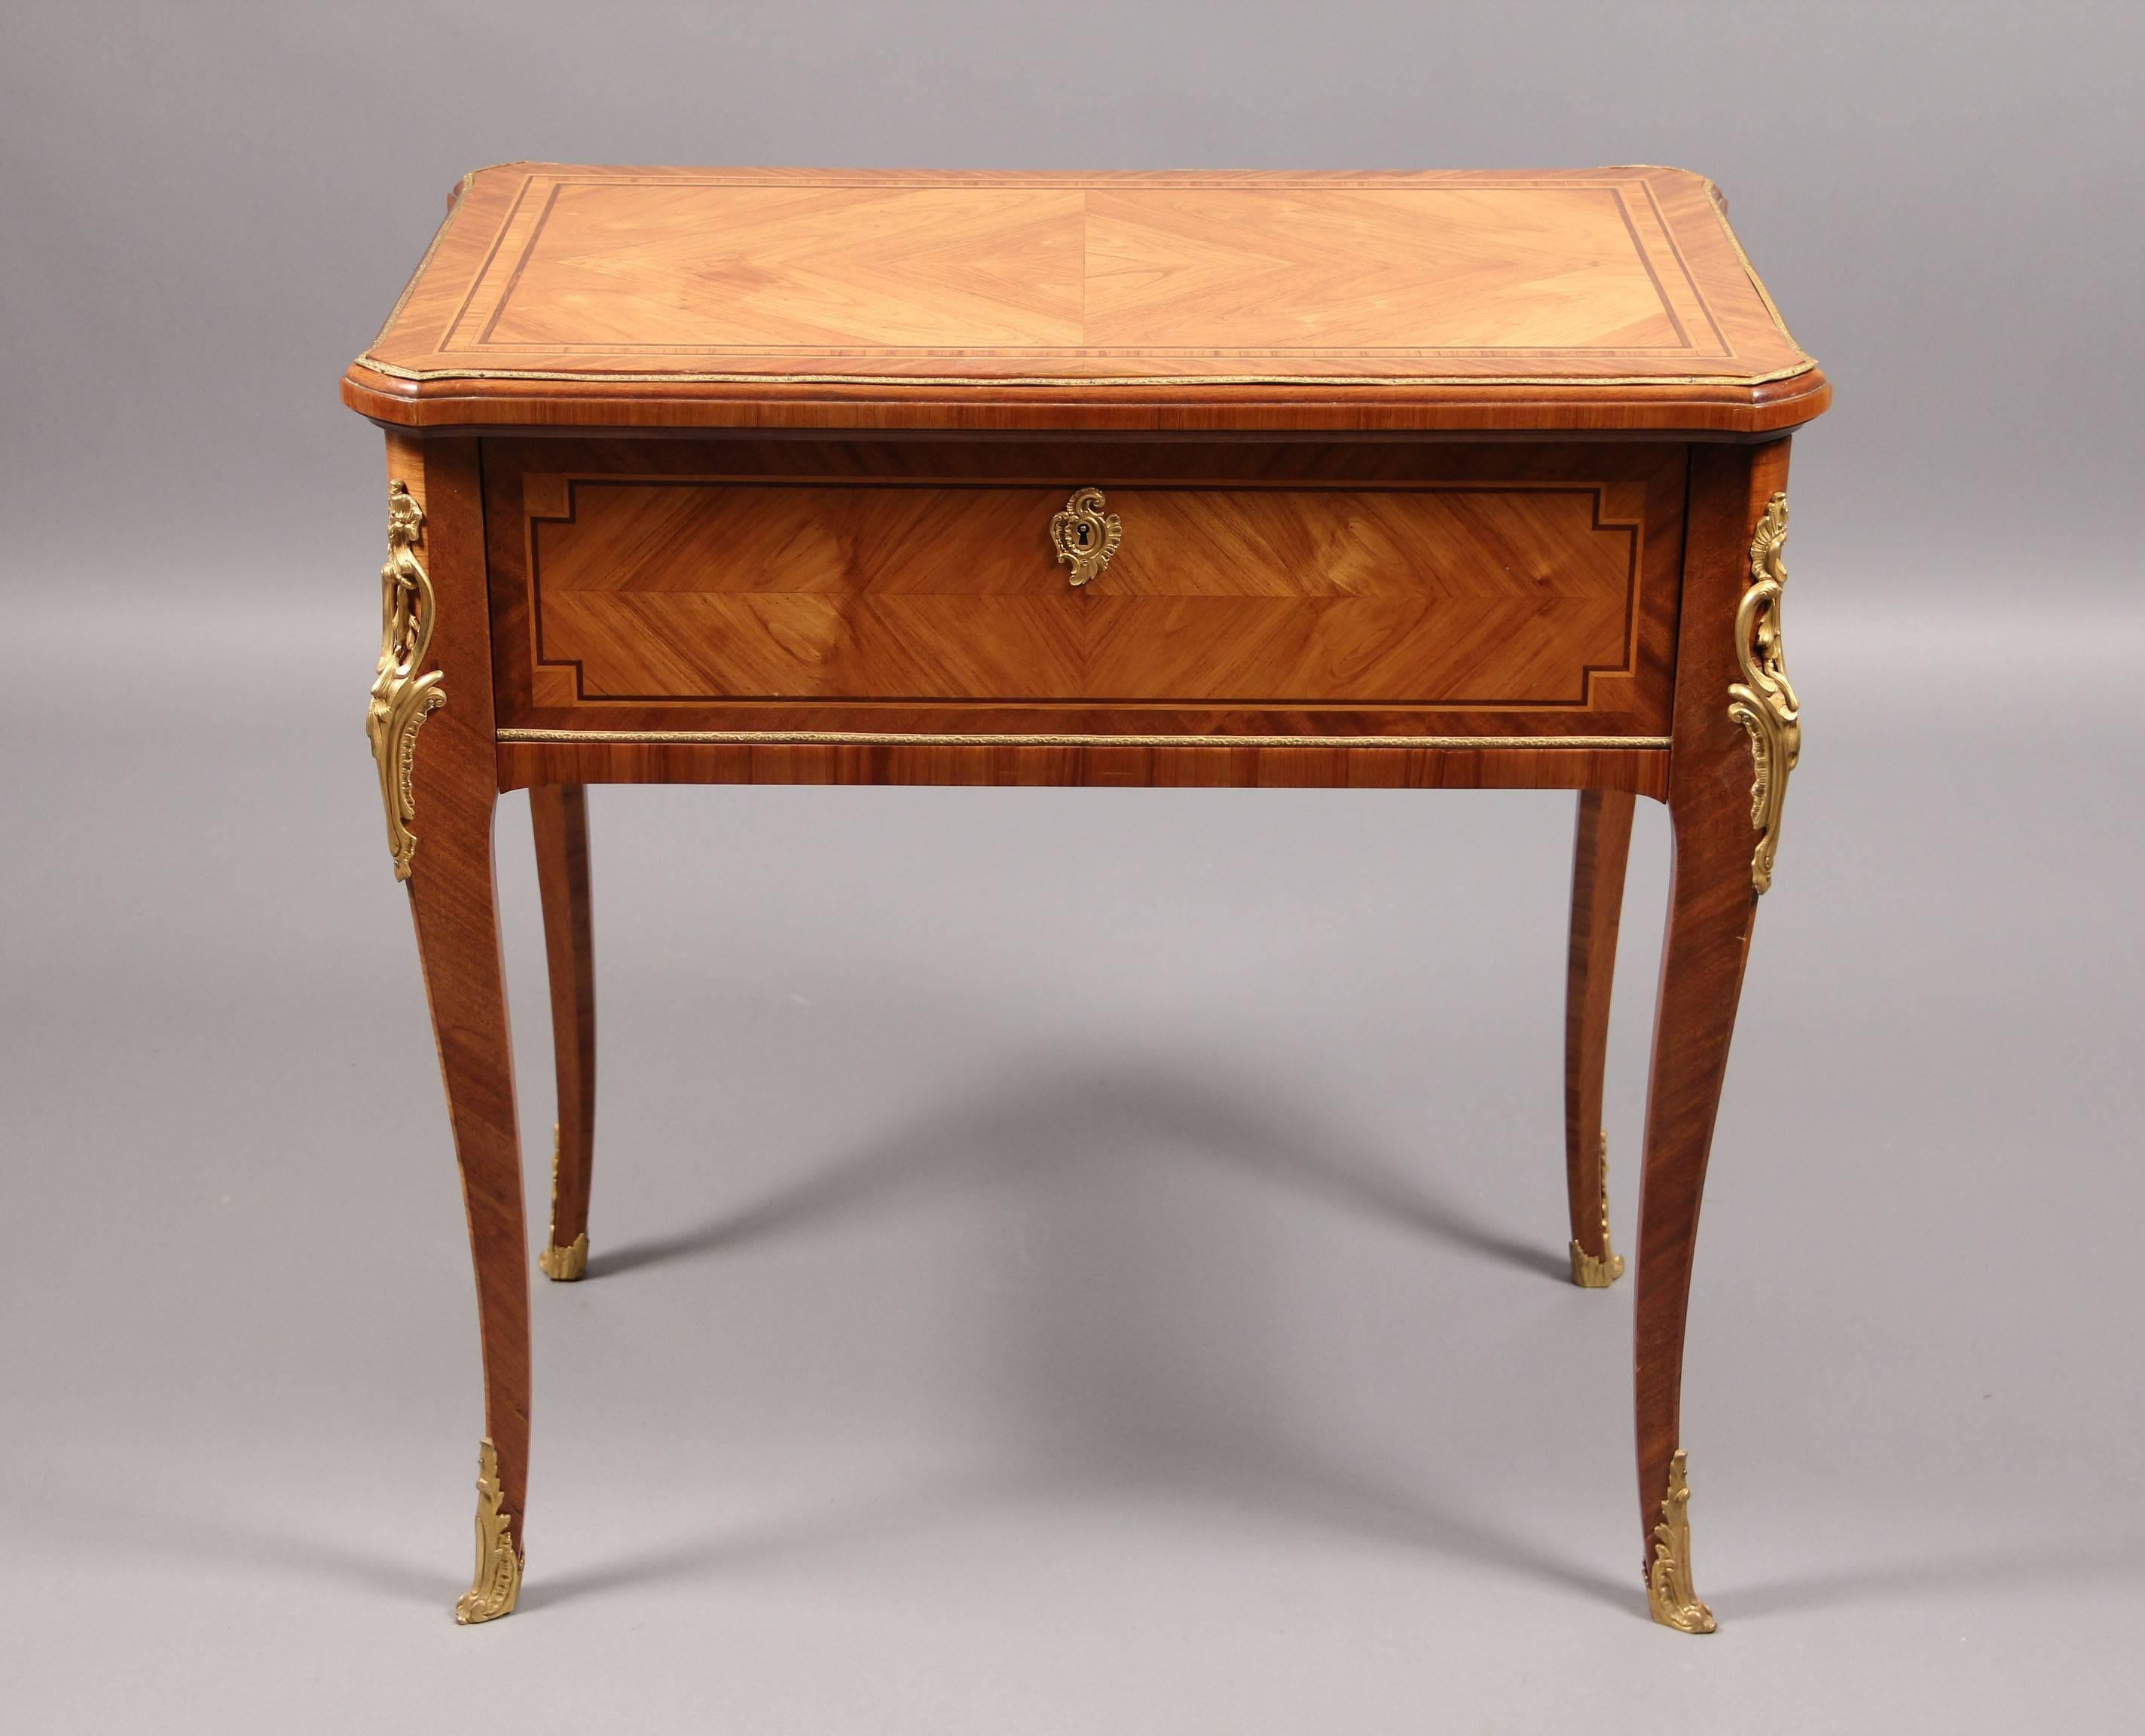 Belle Époque Rare Late 19th Century Dressing Gilt Bronze Mounted Dressing Table For Sale